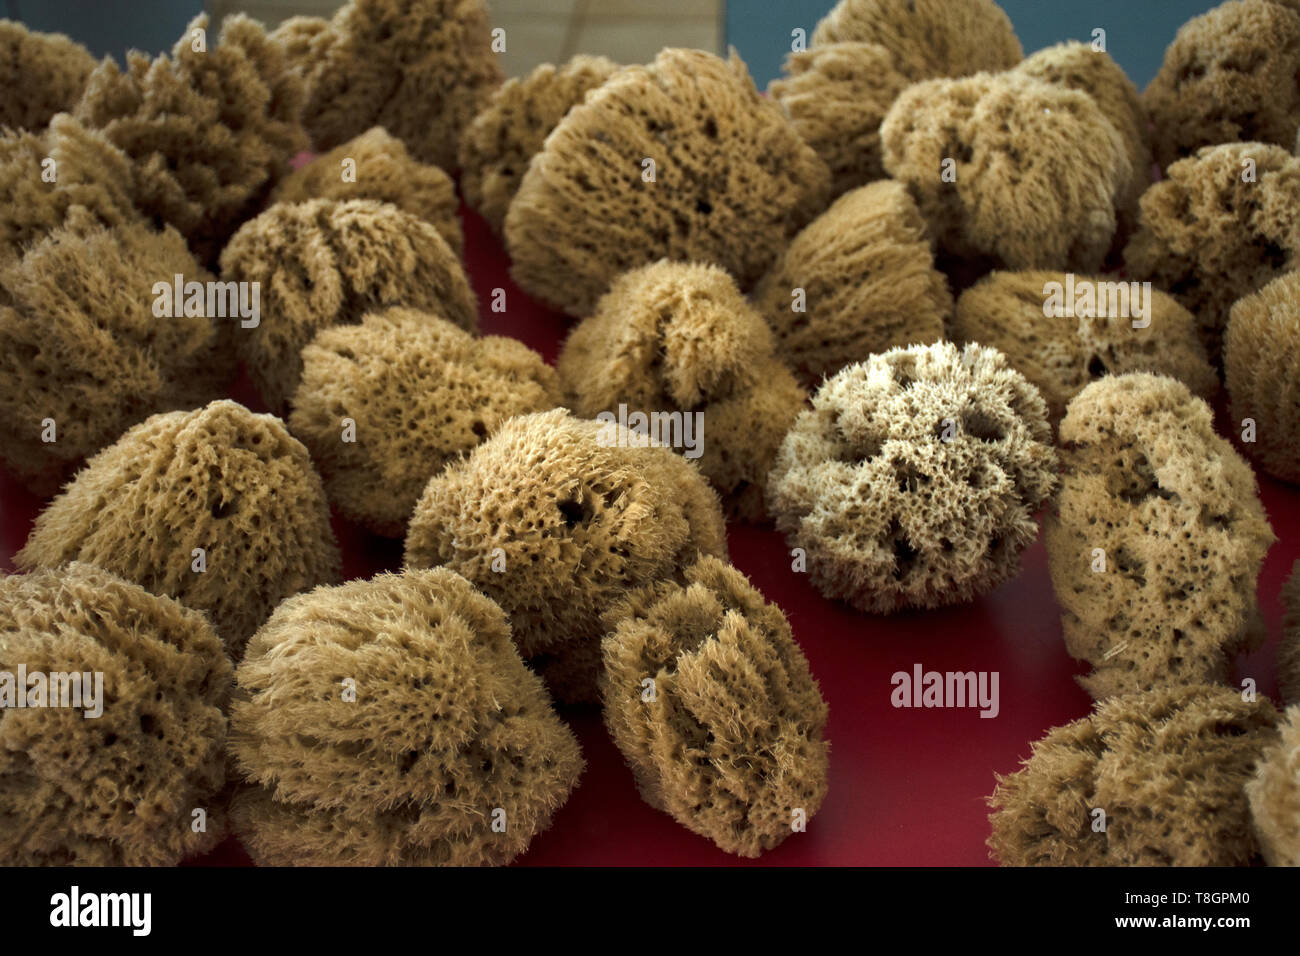 Dried sponges at the Marine and Environmental Institute of Pohnpei, Federated States of Micronesia Stock Photo